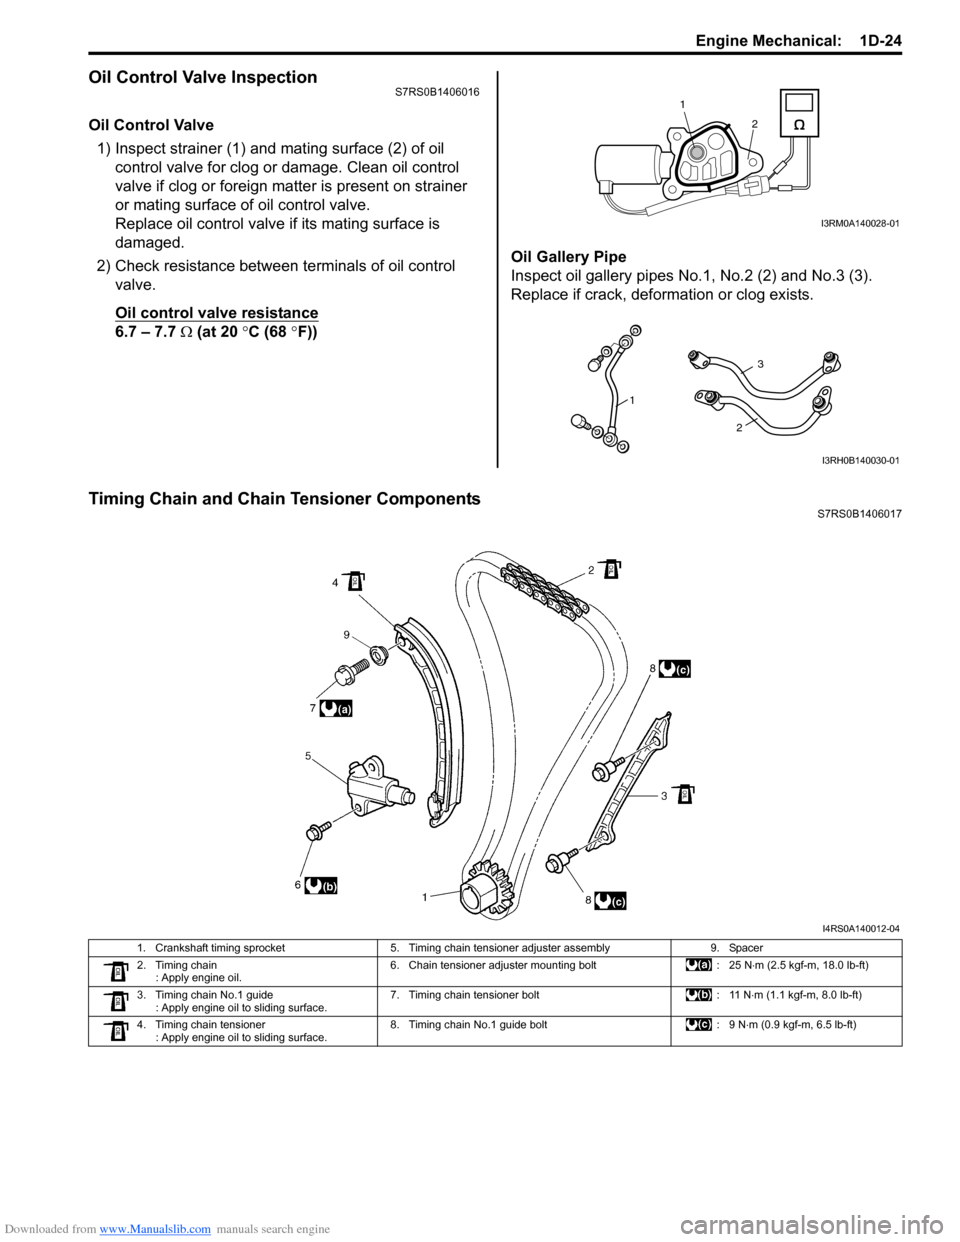 SUZUKI SWIFT 2007 2.G Service Service Manual Downloaded from www.Manualslib.com manuals search engine Engine Mechanical:  1D-24
Oil Control Valve InspectionS7RS0B1406016
Oil Control Valve1) Inspect strainer (1) and mating surface (2) of oil  con